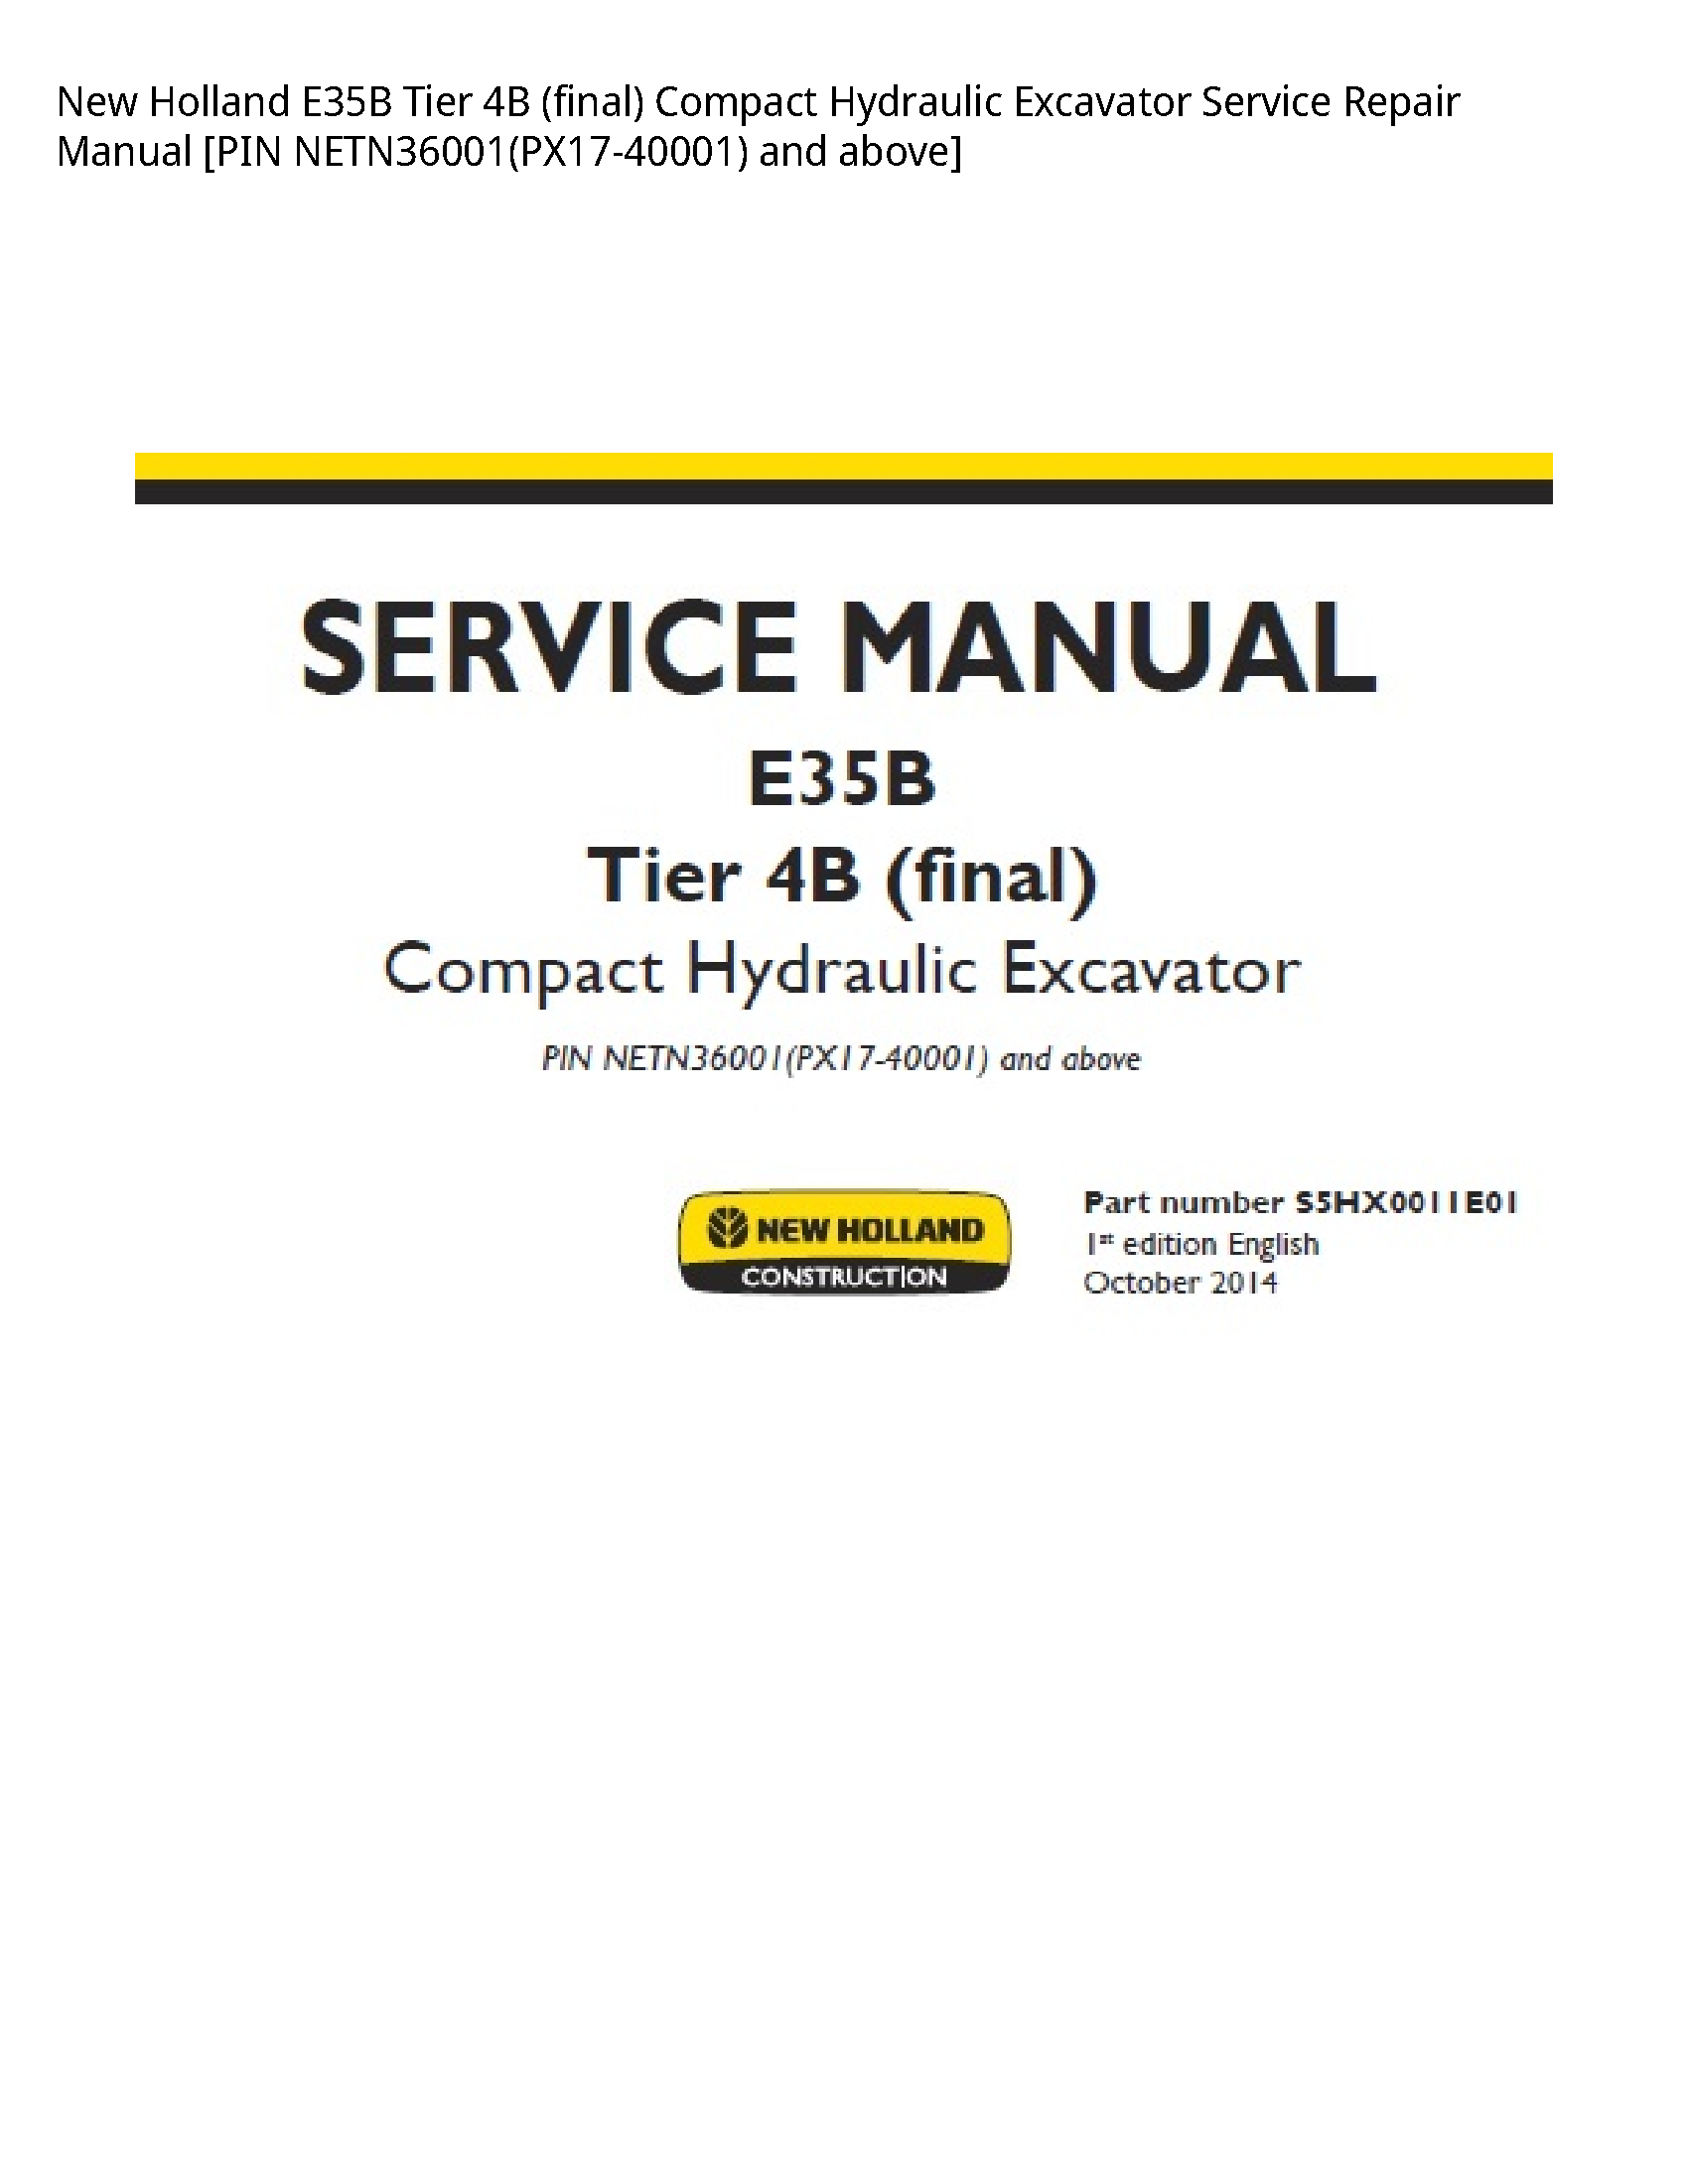 New Holland E35B Tier (final) Compact Hydraulic Excavator manual